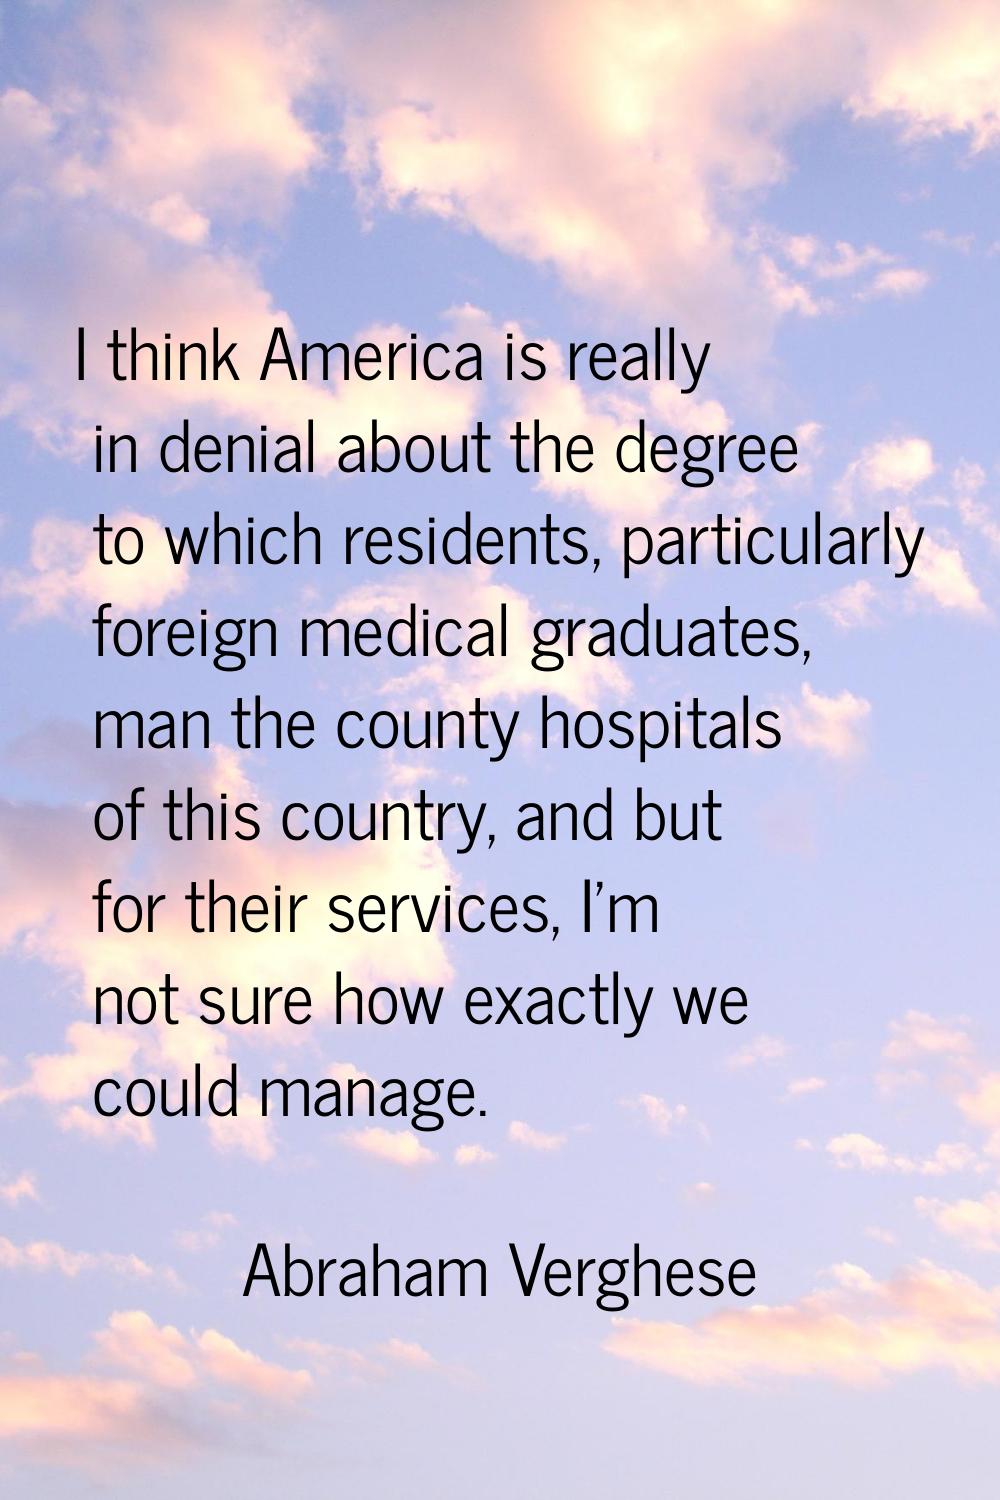 I think America is really in denial about the degree to which residents, particularly foreign medic